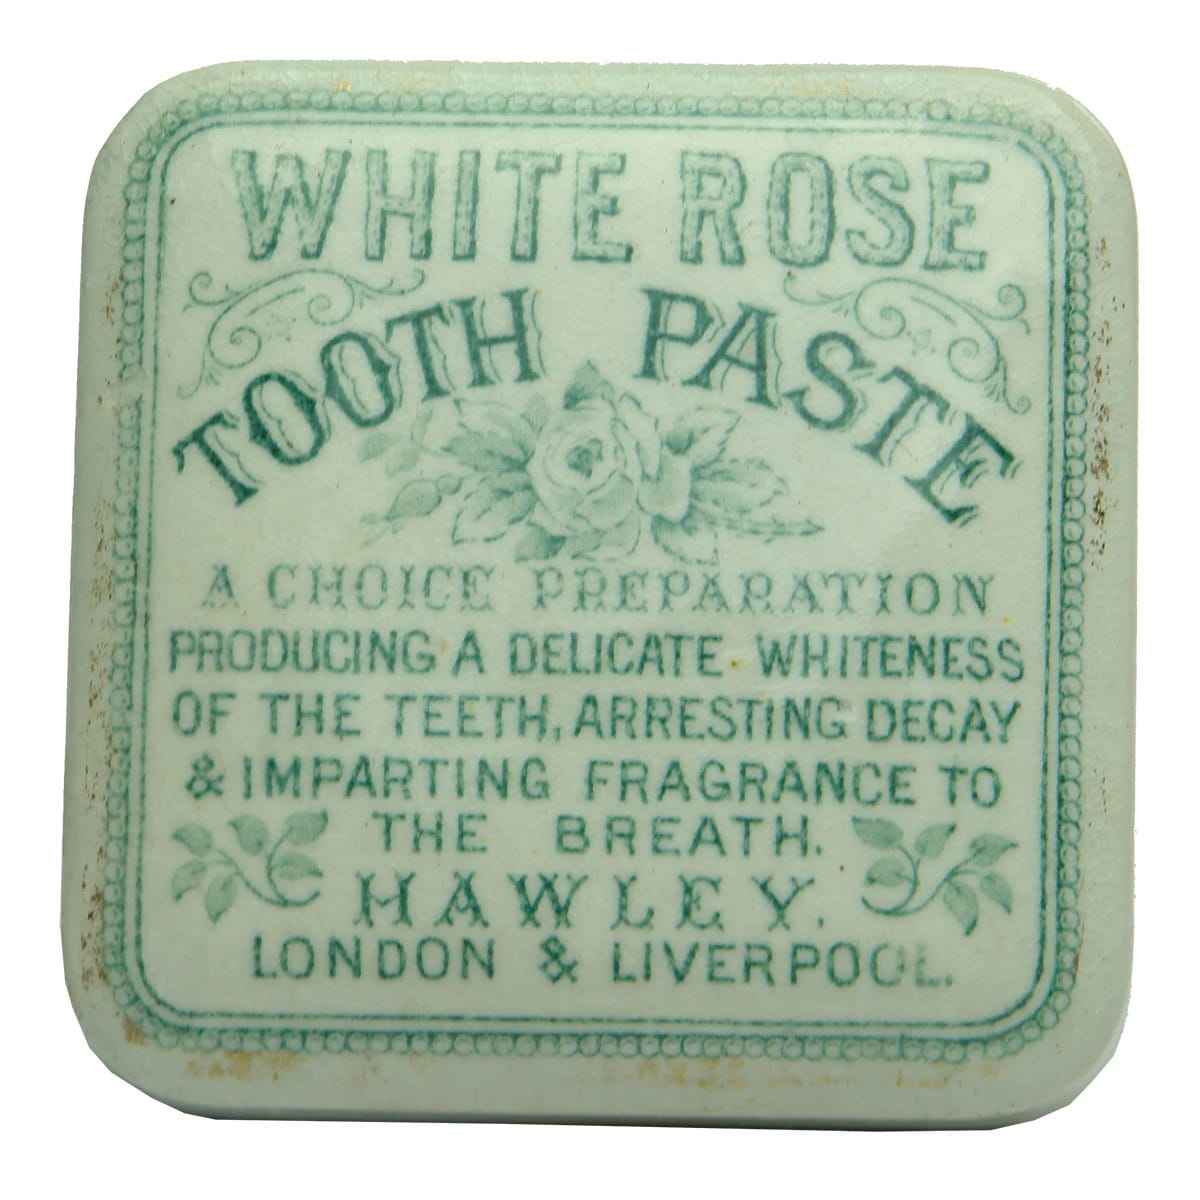 Pot Lid. Hawley, London & Liverpool. White Rose Tooth Paste. Green Print.